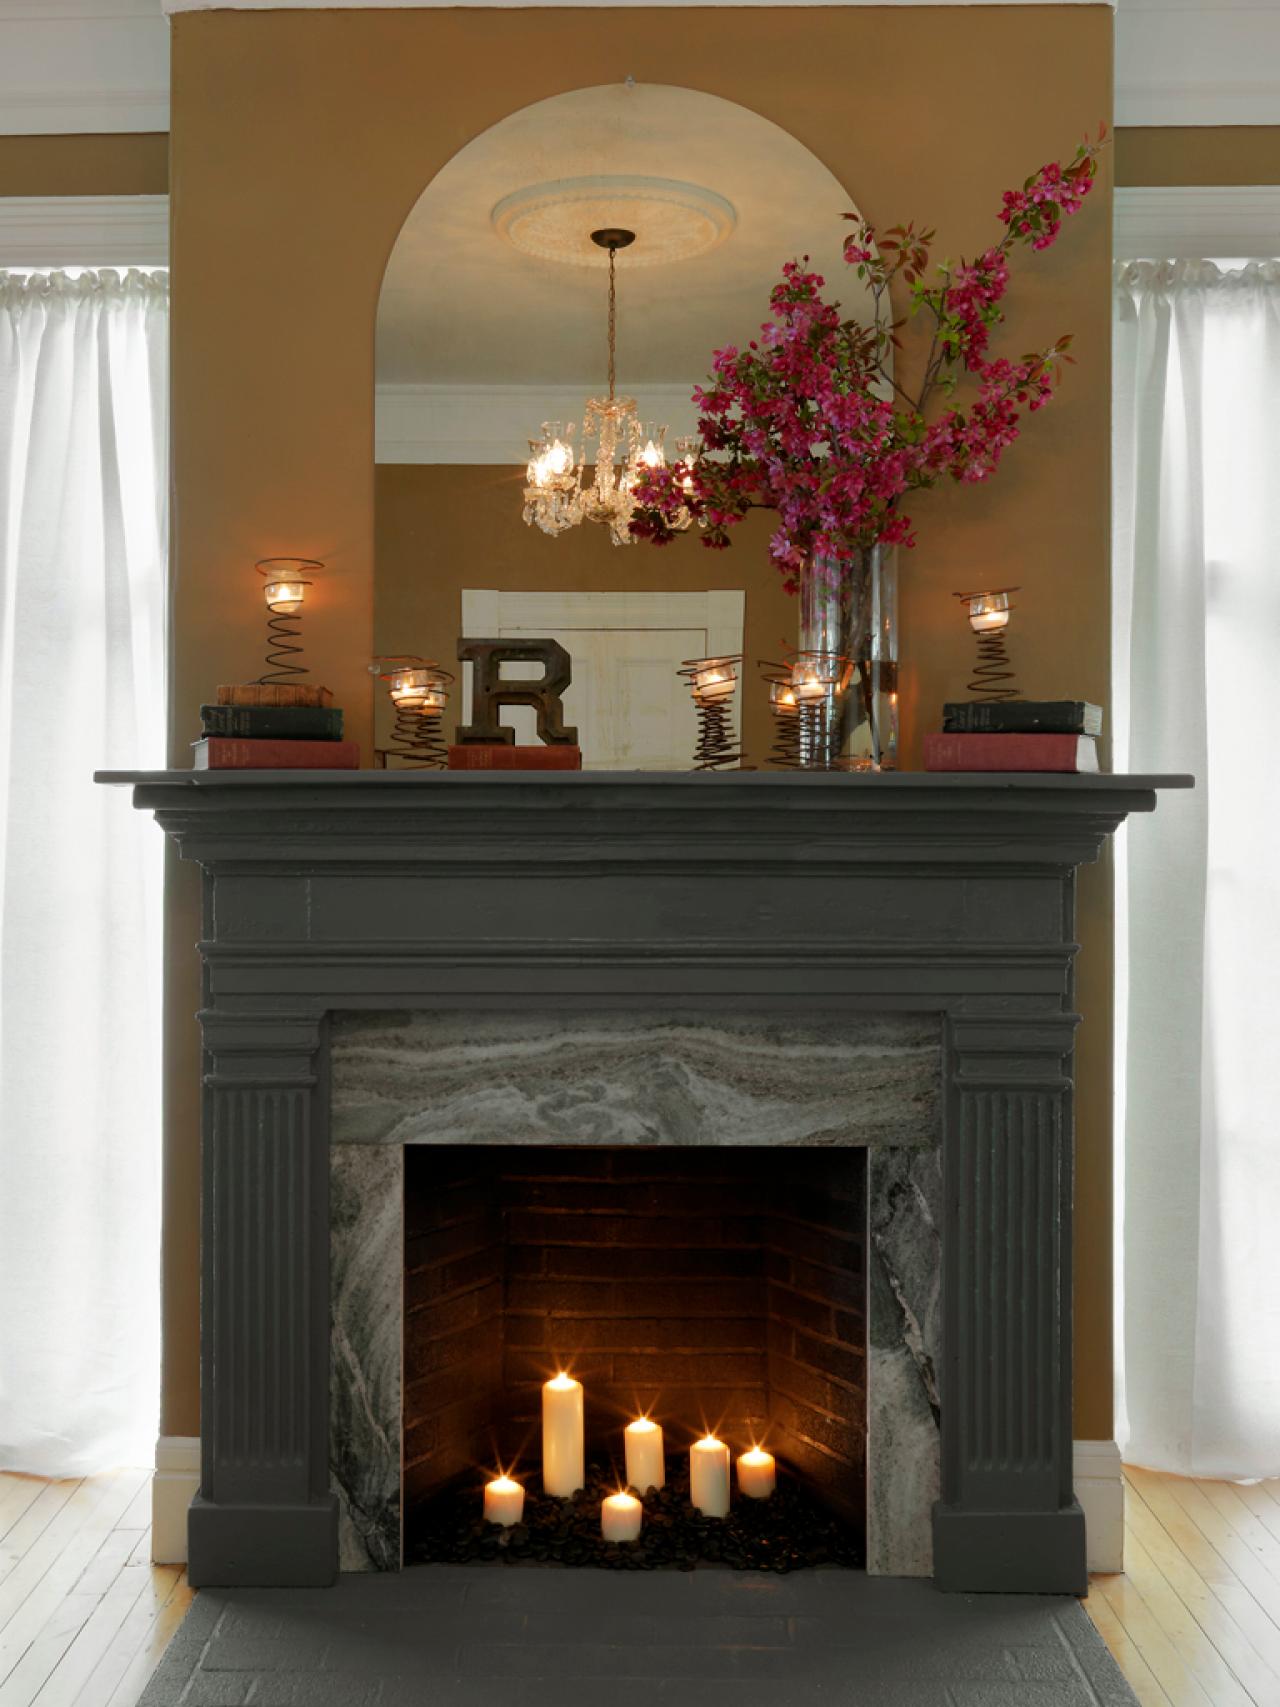 Fireplace Surround And Make A Mantel, How To Get Mantel Of Fireplace